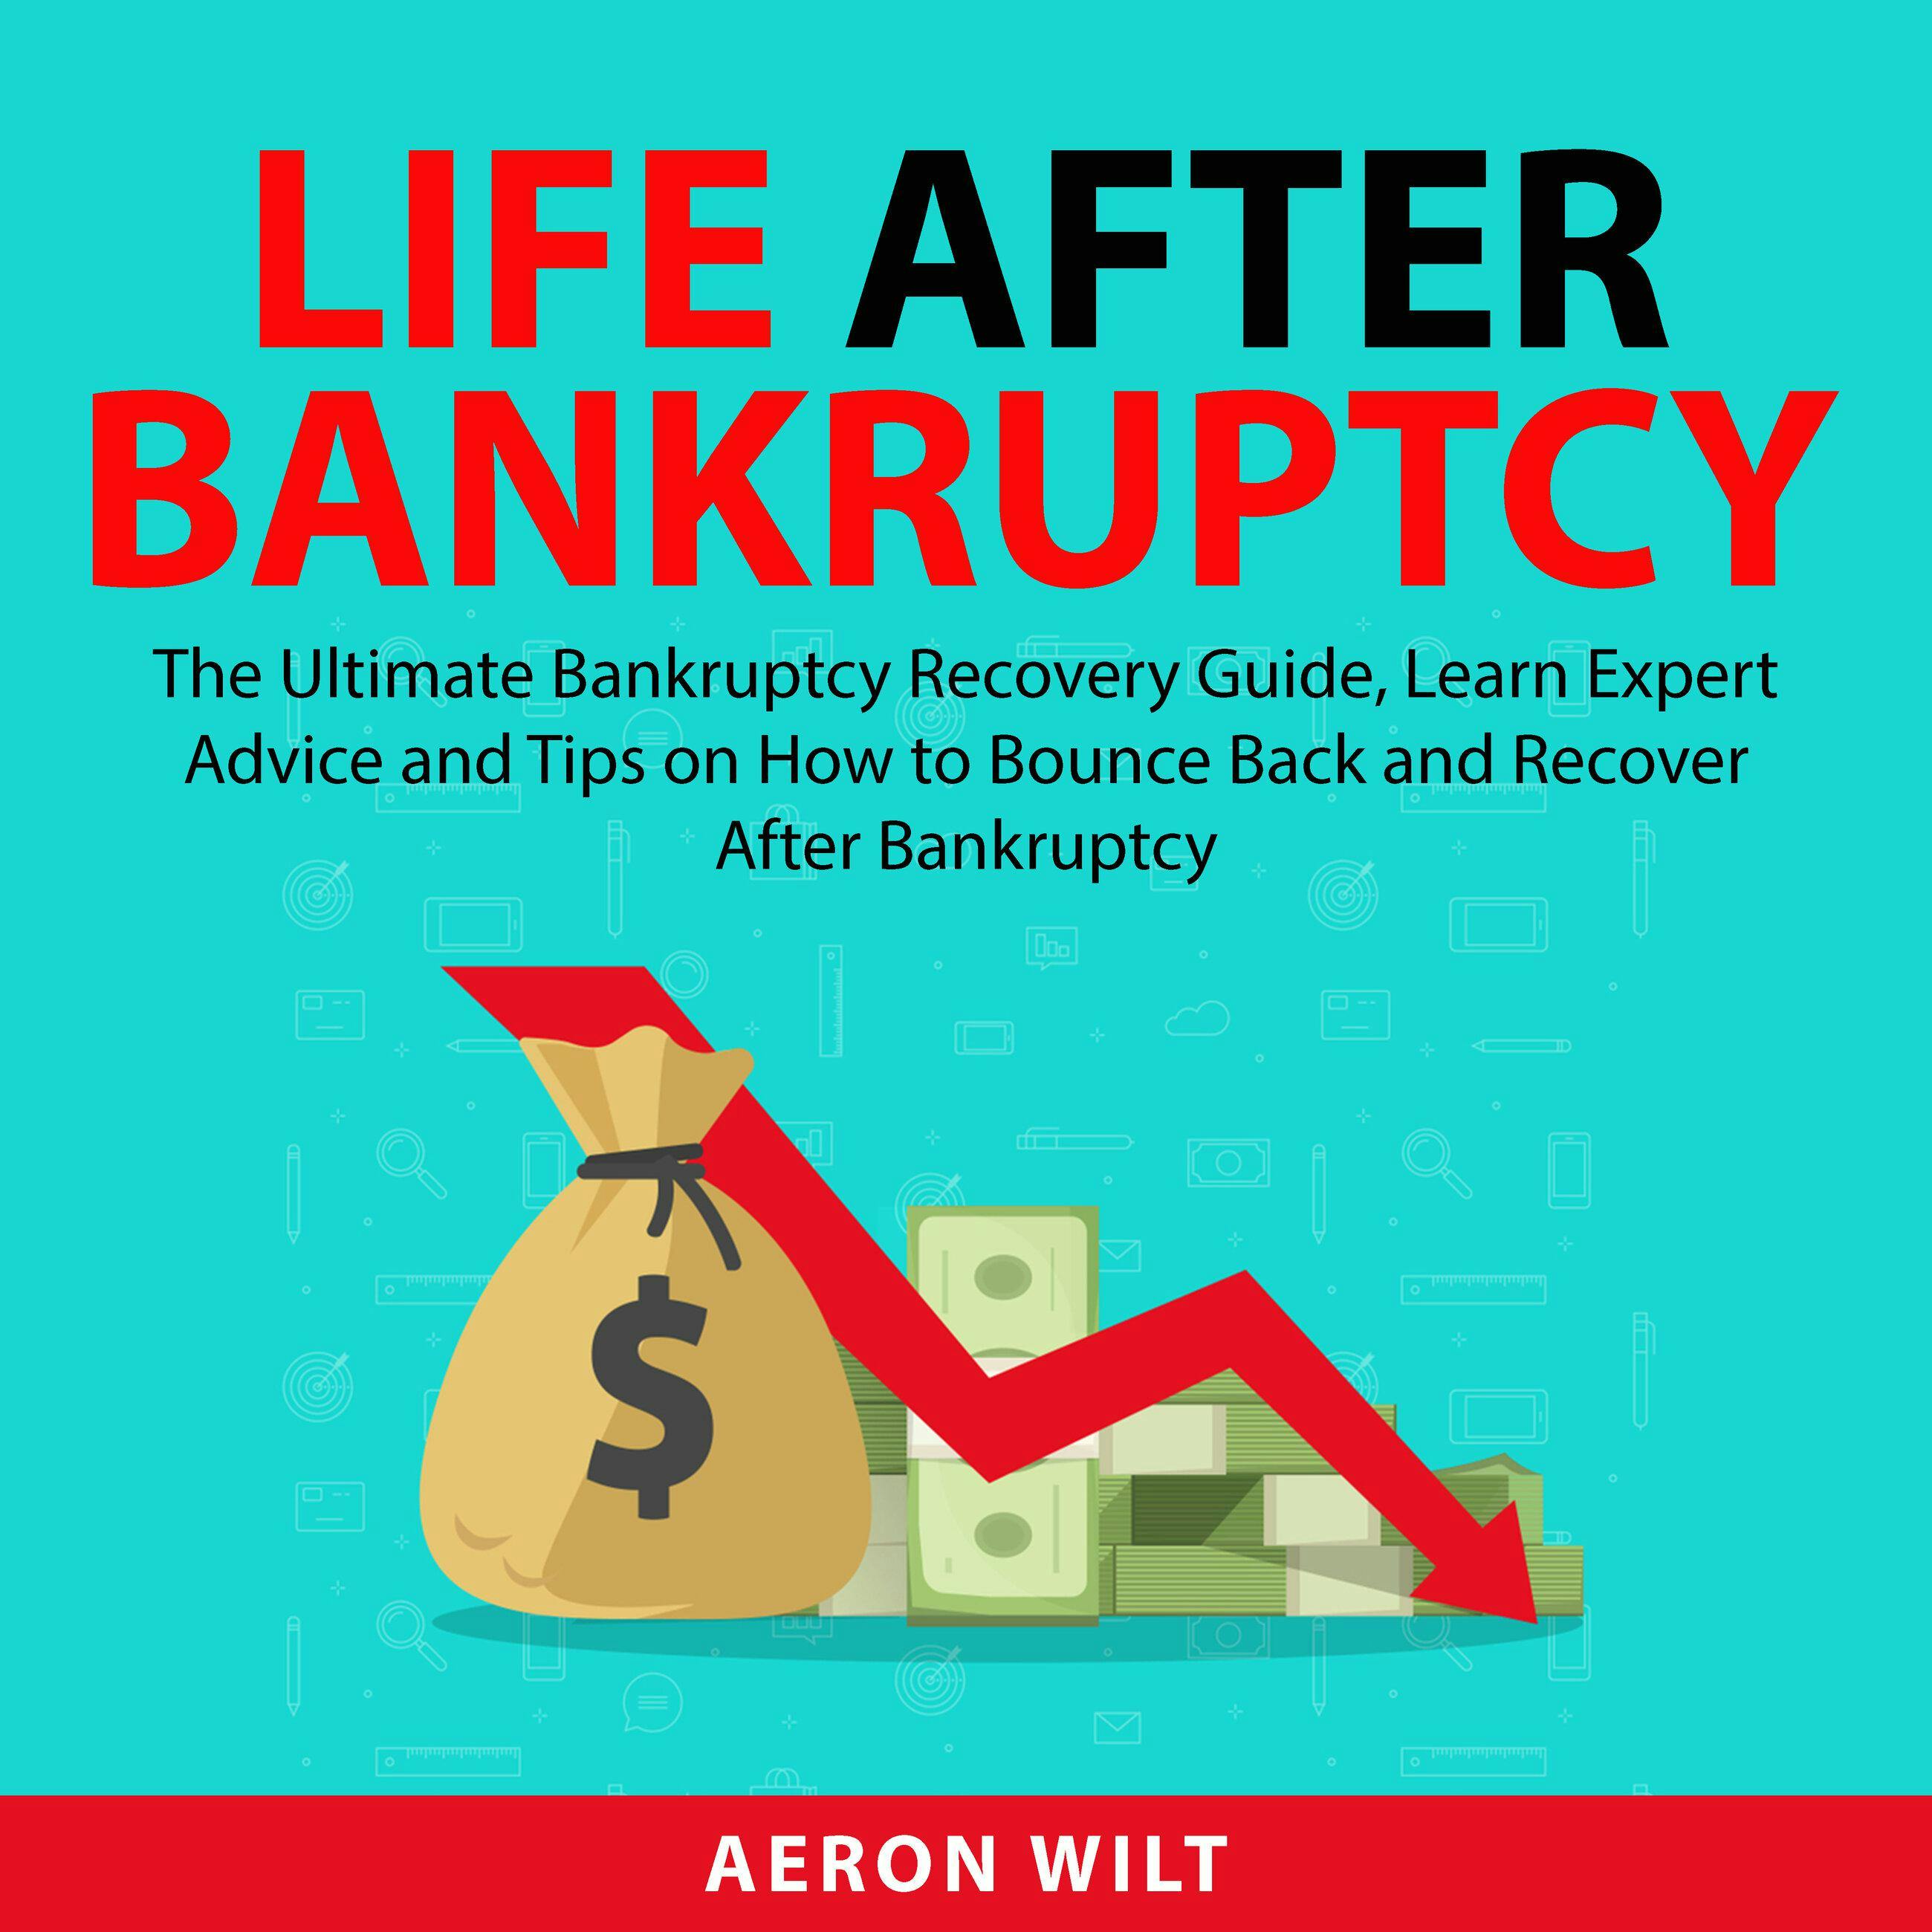 Life After Bankruptcy: The Ultimate Bankruptcy Recovery Guide, Learn Expert Advice and Tips on How to Bounce Back and Recover After Bankruptcy - Aeron Wilt